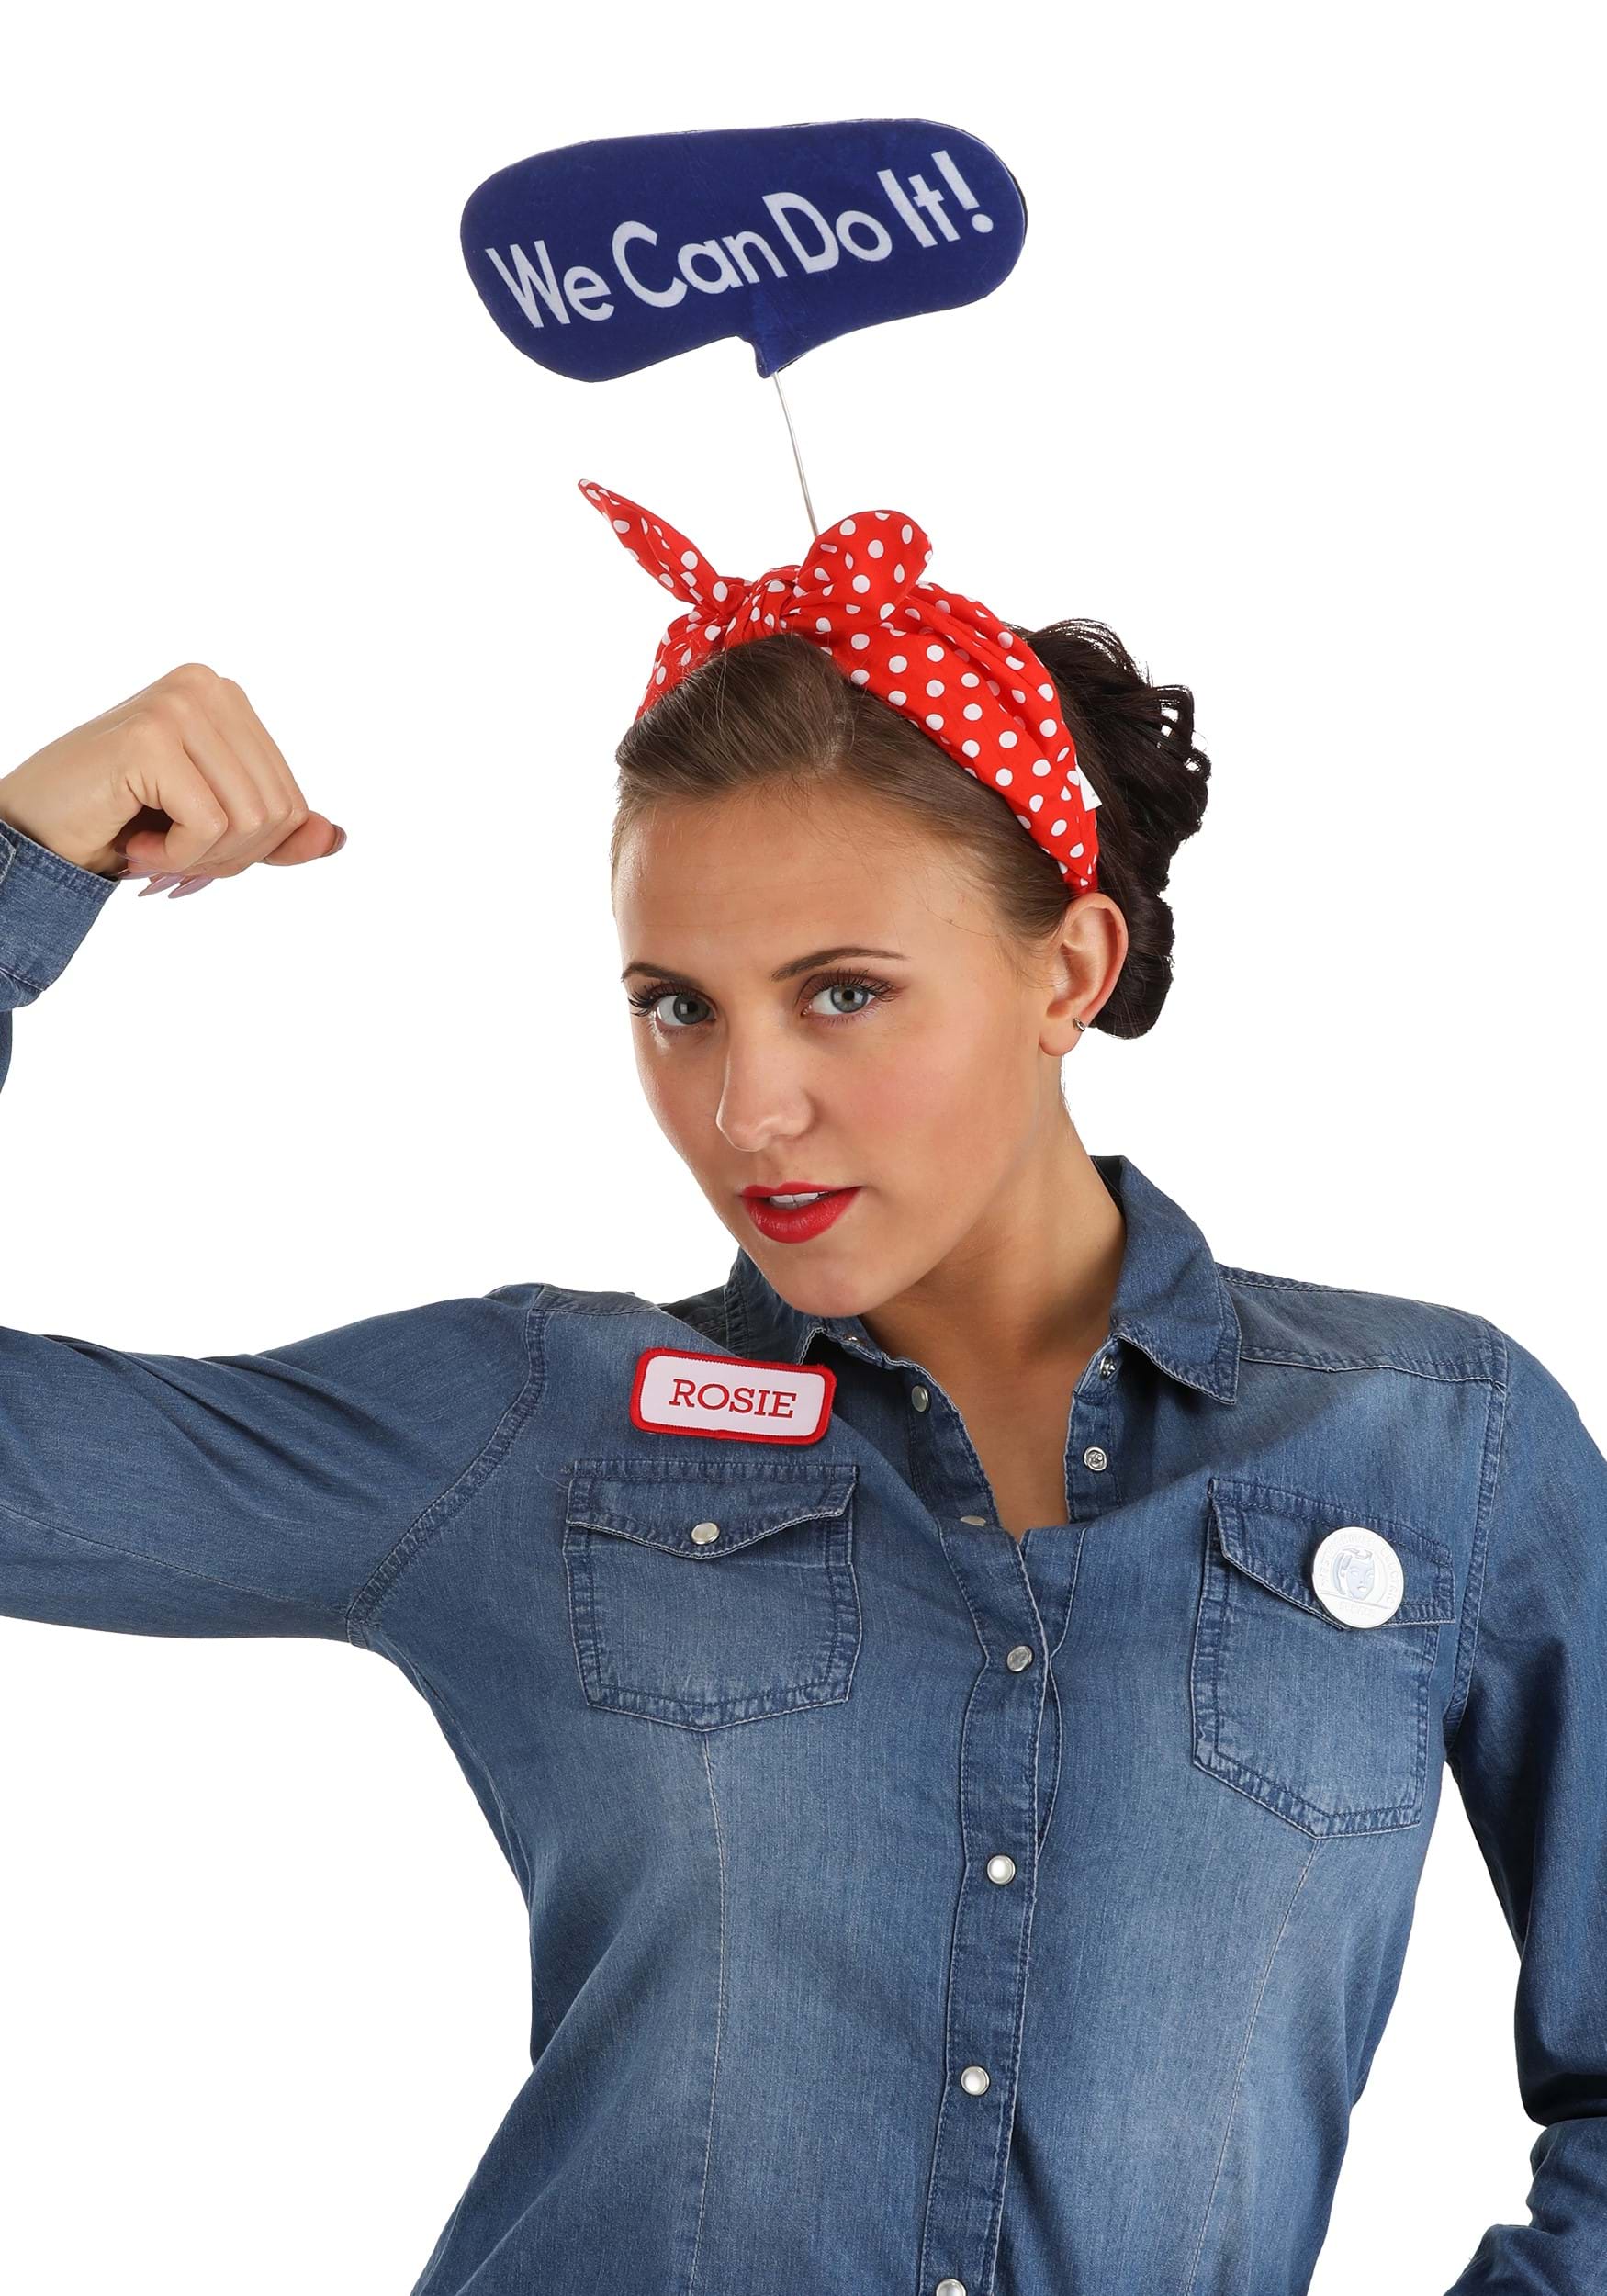 https://images.halloweencostumes.ca/products/78410/1-1/rosie-the-riveter-costume-kit.jpg